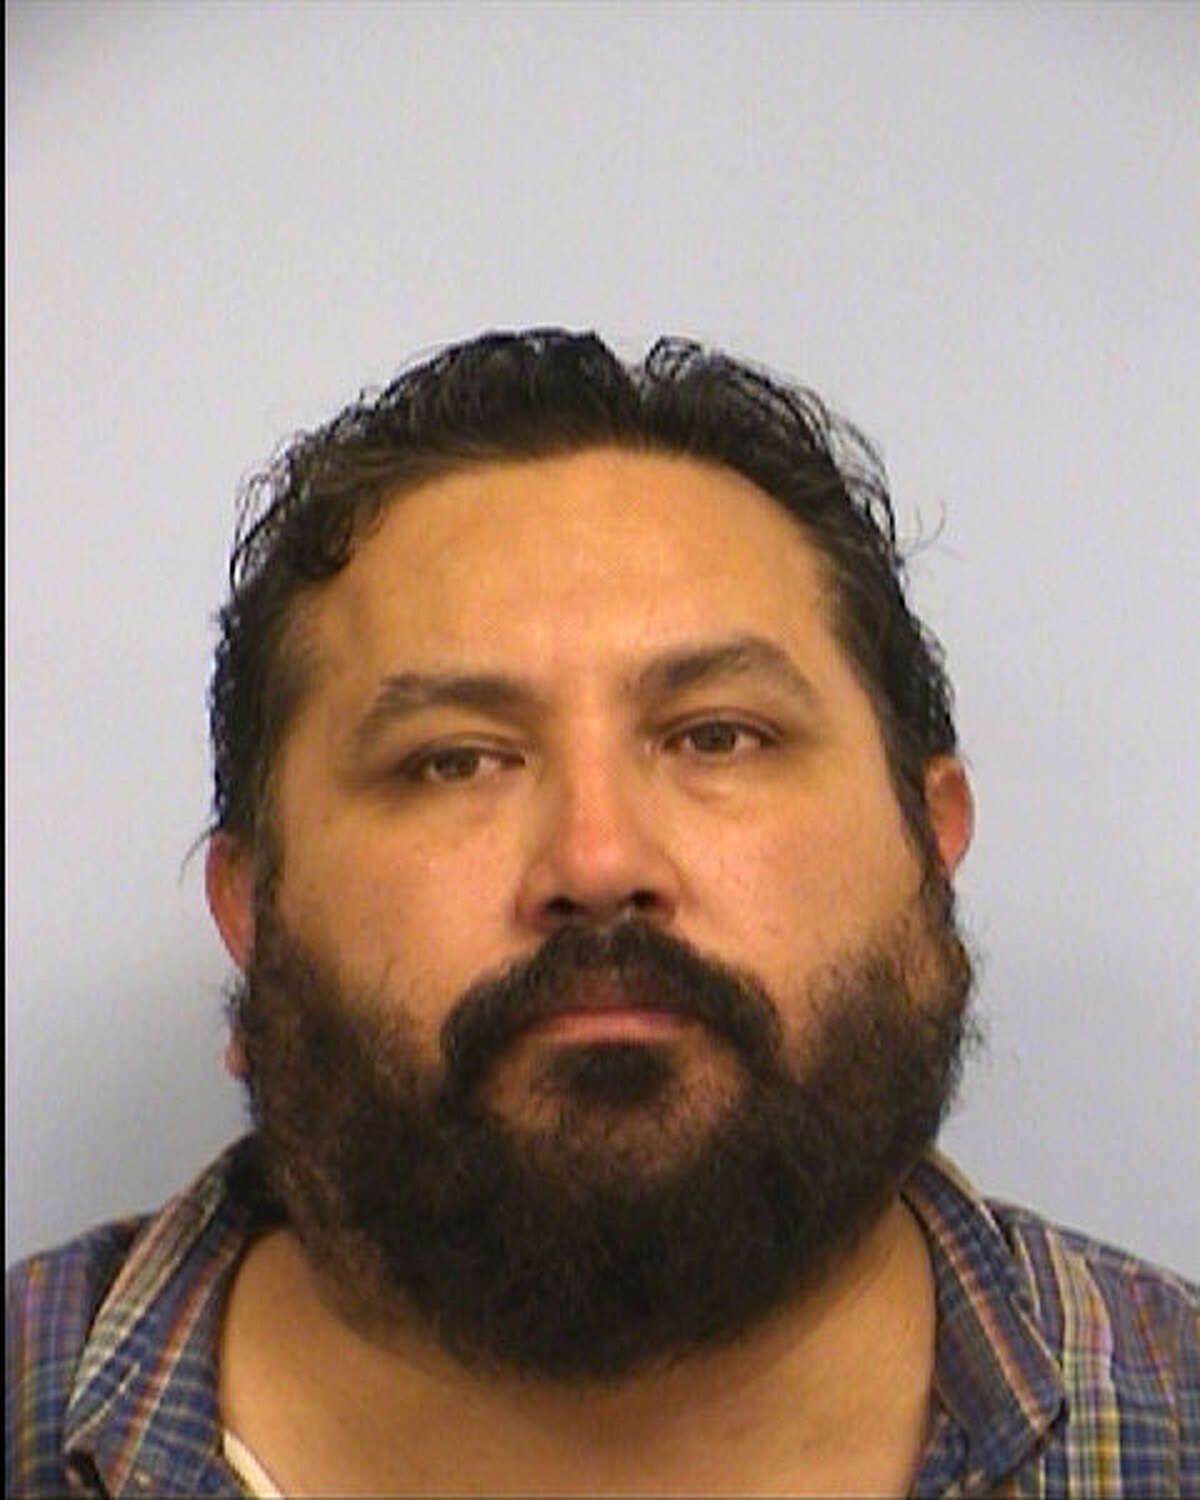 A former elementary school teacher in Austin was sentenced Dec. 17, 2014, to 16 years in prison after being found guilty of sexually assaulting a 6-year-old girl in his first-grade class in 2011. John Joseph Vasquez, a 45-year-old who taught at Blazier Elementary School, was found guilty Dec. 16, 2014, on charges of indecency with a child by contact and improper relationship between an education and a student, the Austin American-Statesman reported.